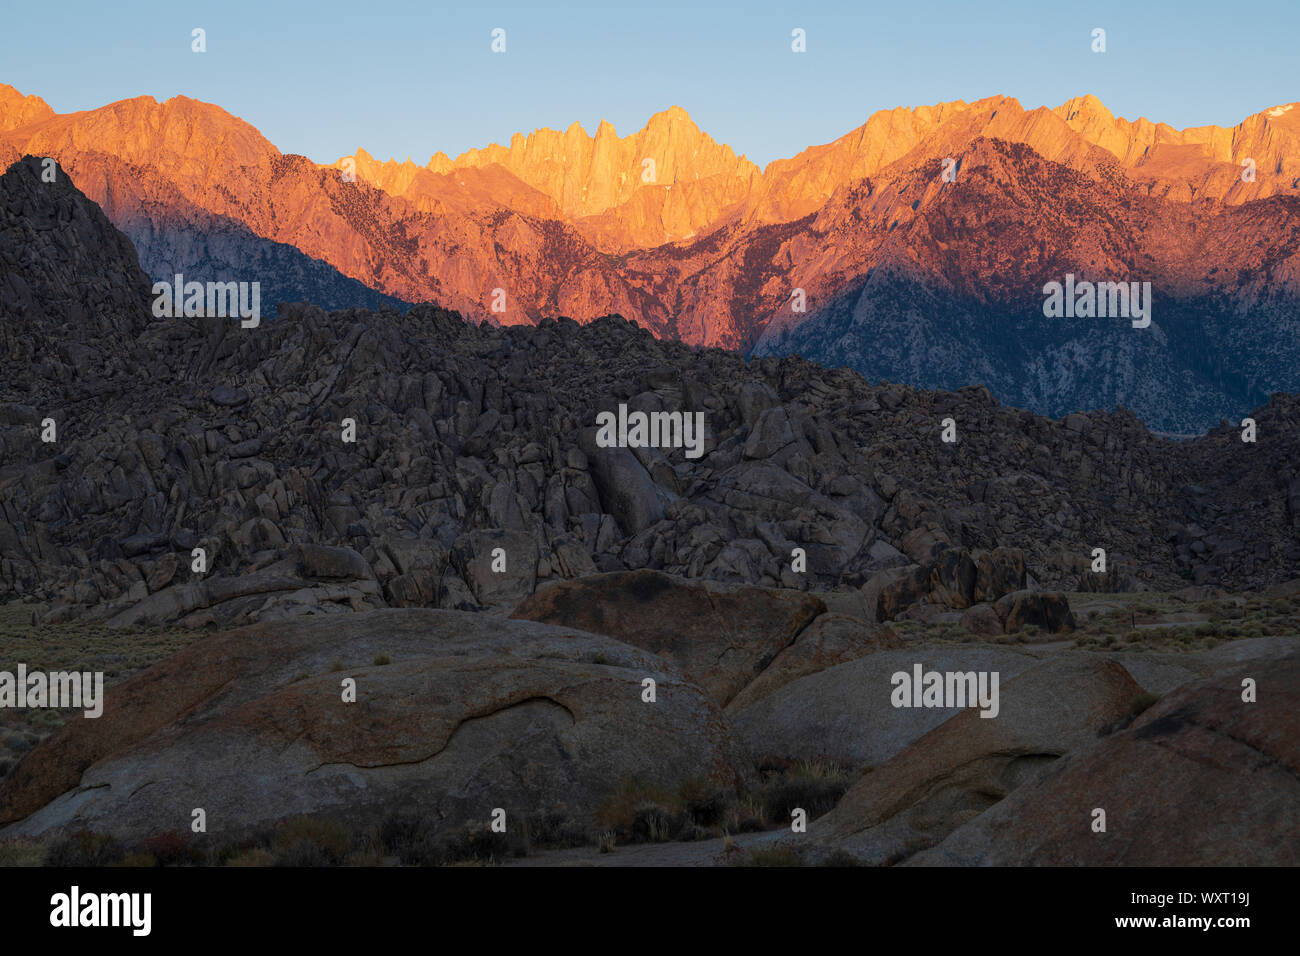 Mt. Whitney at sunrise from Alabama Hills in Lone Pine, California along the scenic Eastern Sierra. Stock Photo